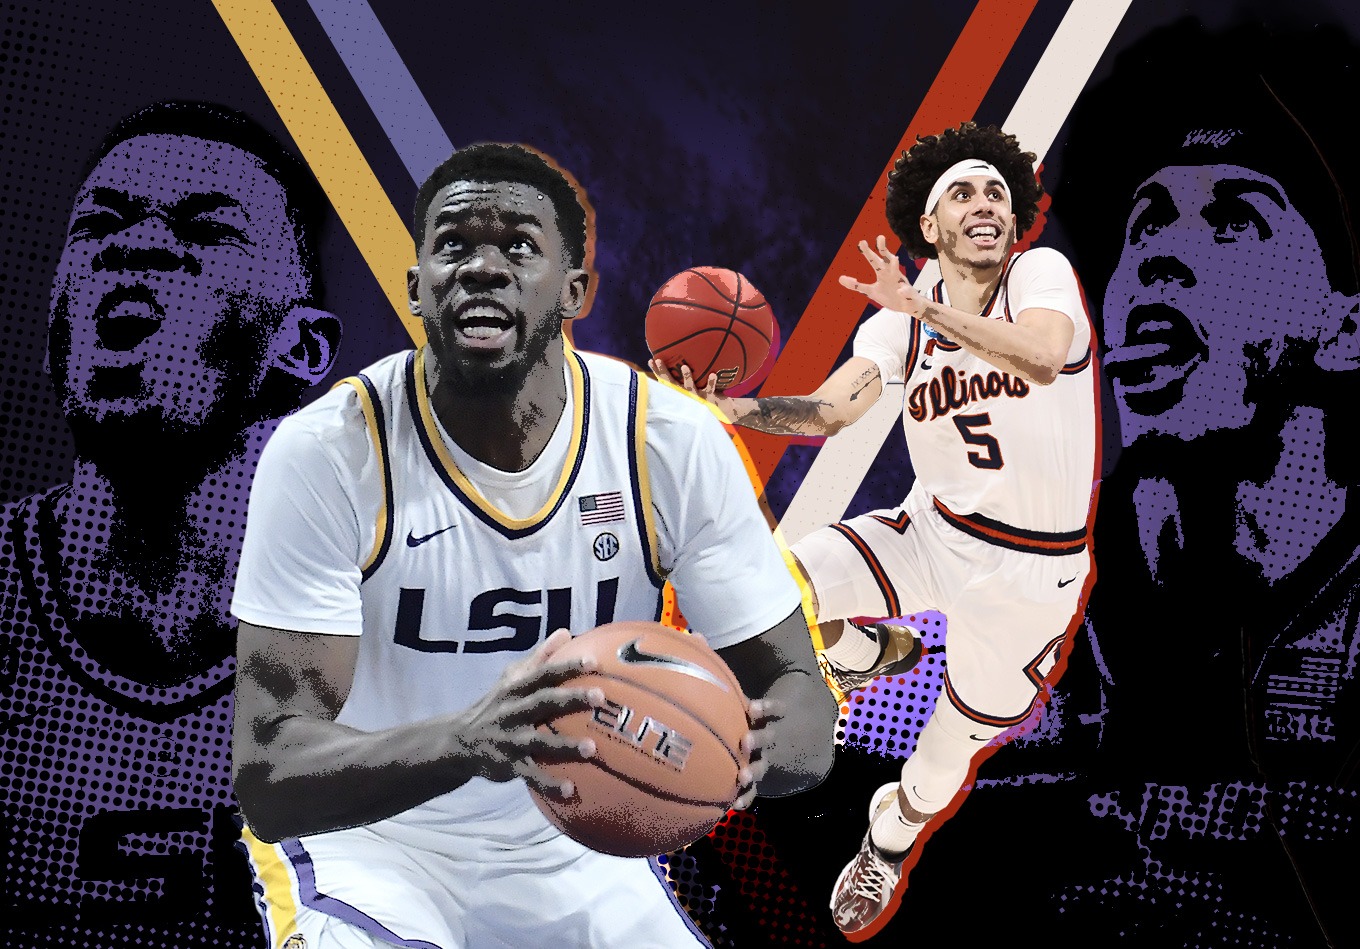 LSU, the Big Ten and Other Major Movers in This Week’s TRACR Rankings